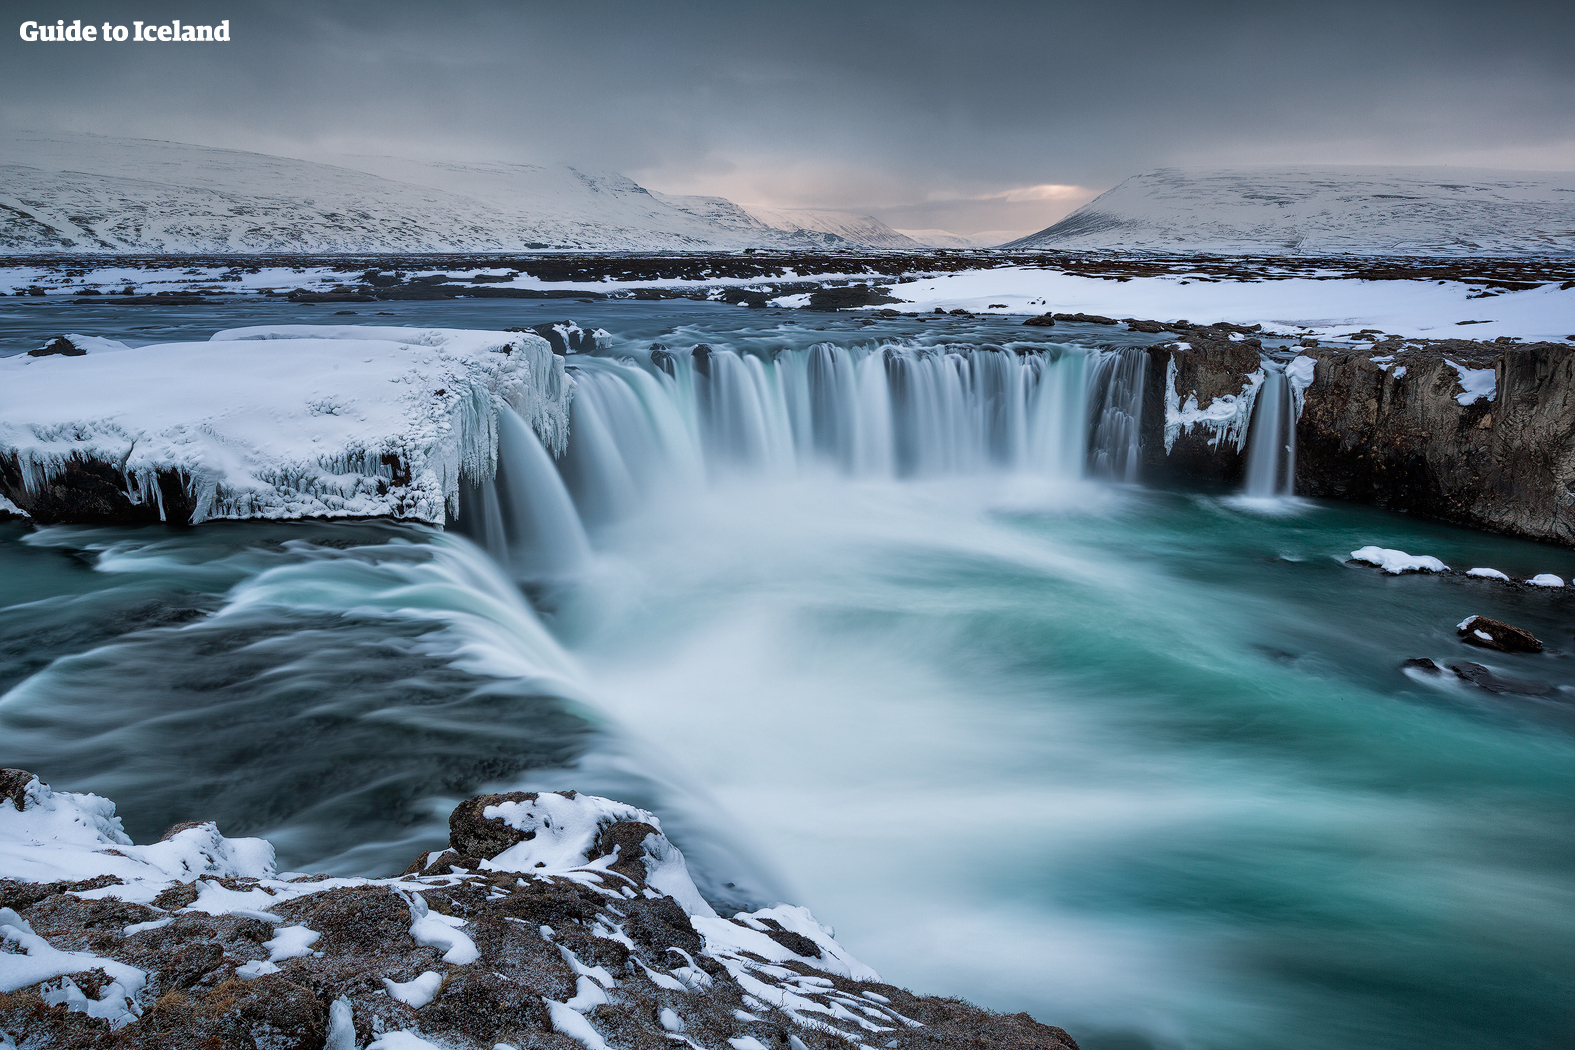 Almost exactly halfway between Akureyri and the Mývatn area is the horseshoe-shaped waterfall Goðafoss.